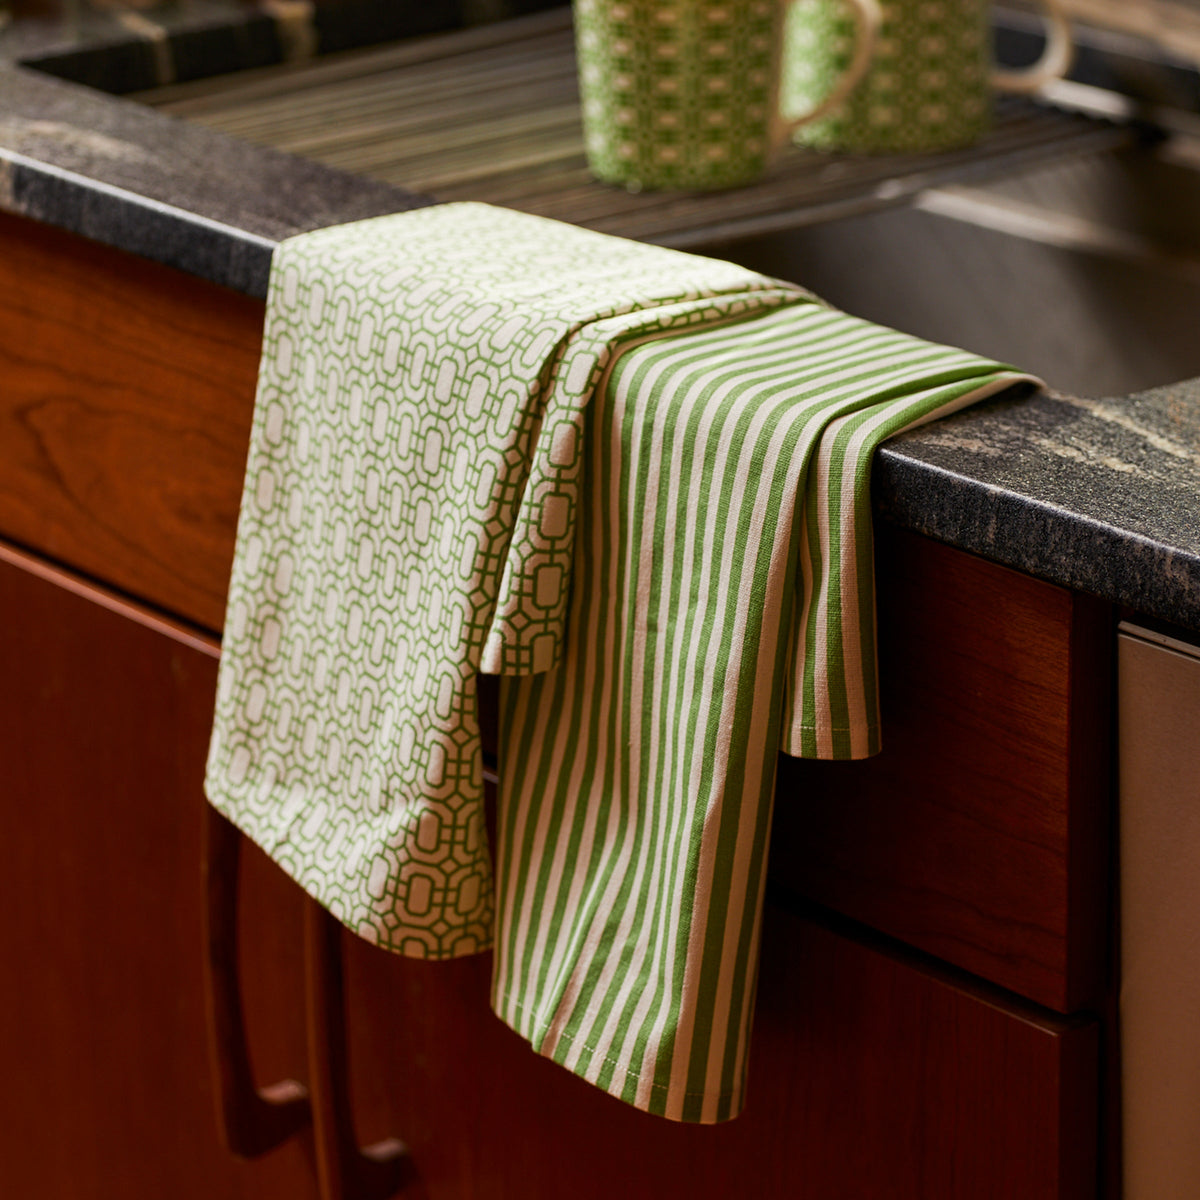 Caskata&#39;s Newport Garden Gate &amp; Pinstripe Green Kitchen Towels Mixed Set/2 in spring green and white, are hanging on a kitchen counter.